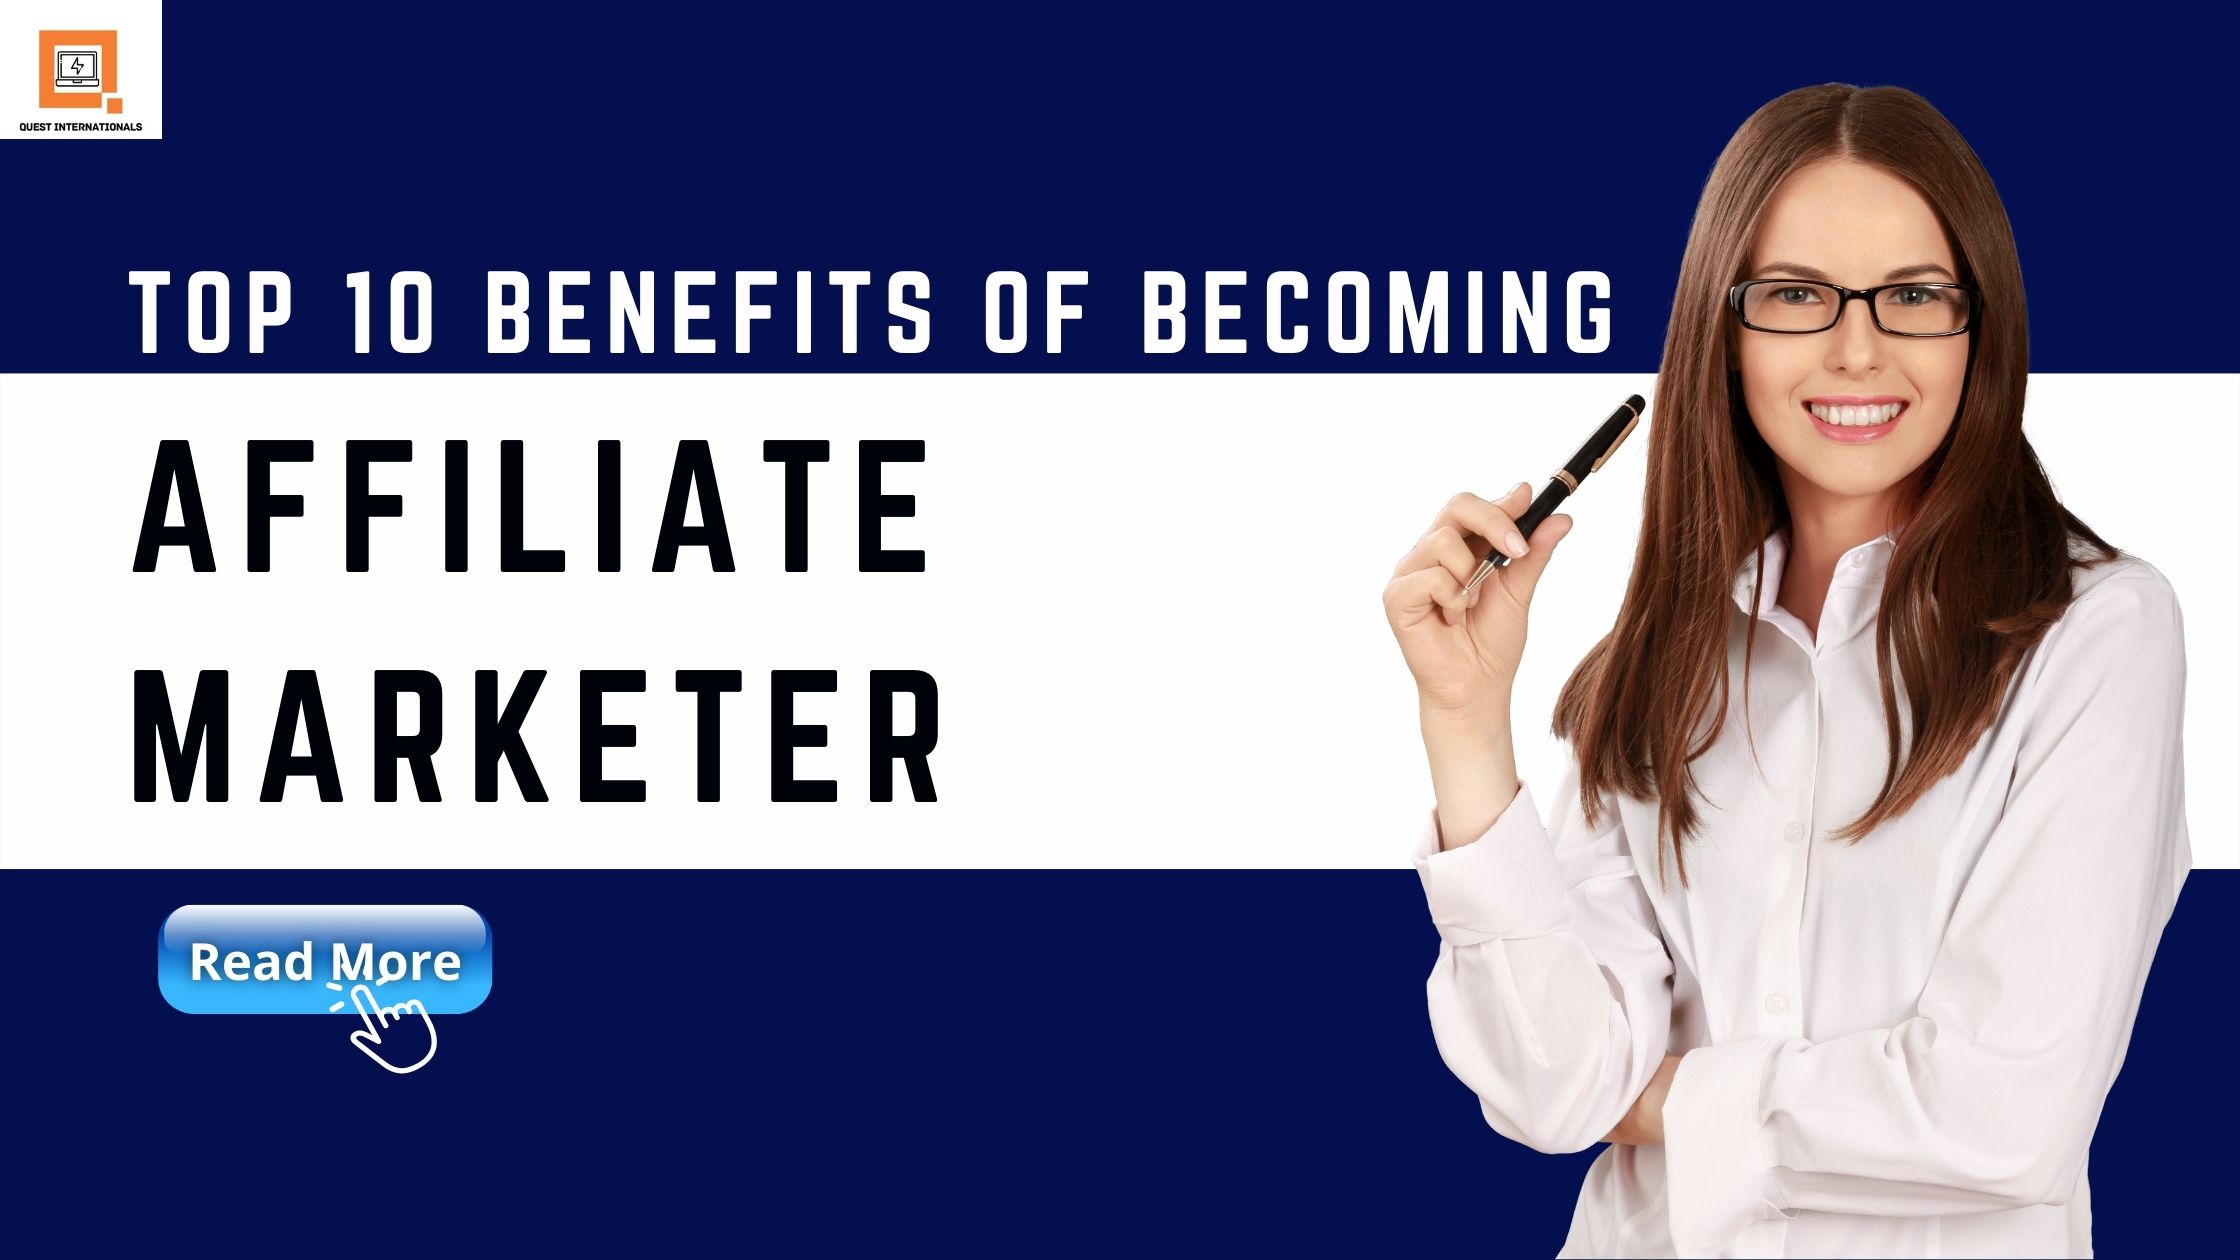 You are currently viewing Top 10 Benefits Of Becoming an Affiliate Marketer